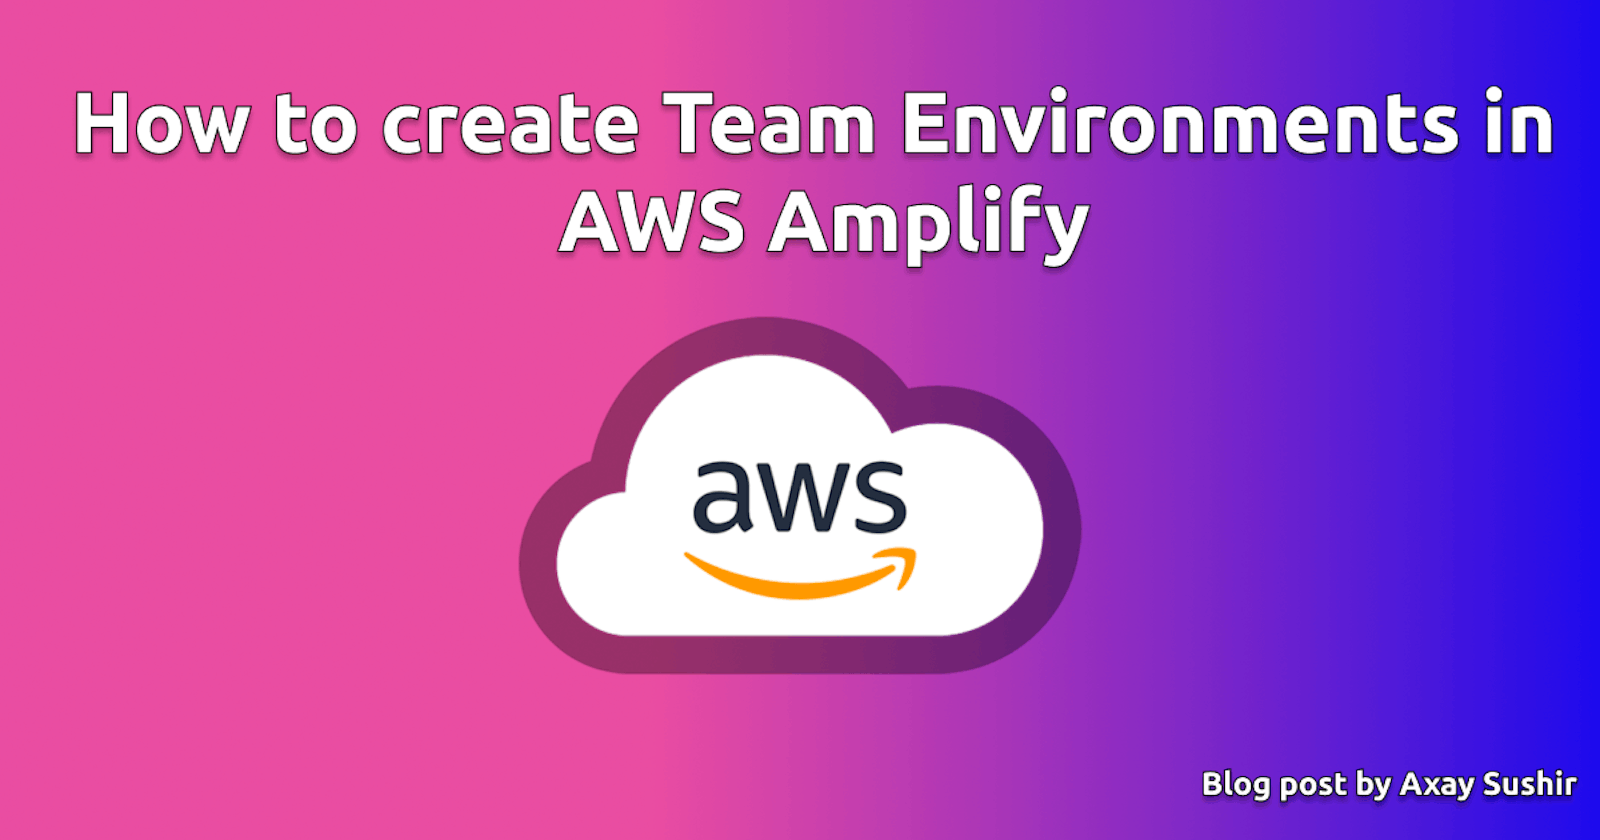 How to create Team Environments in AWS Amplify